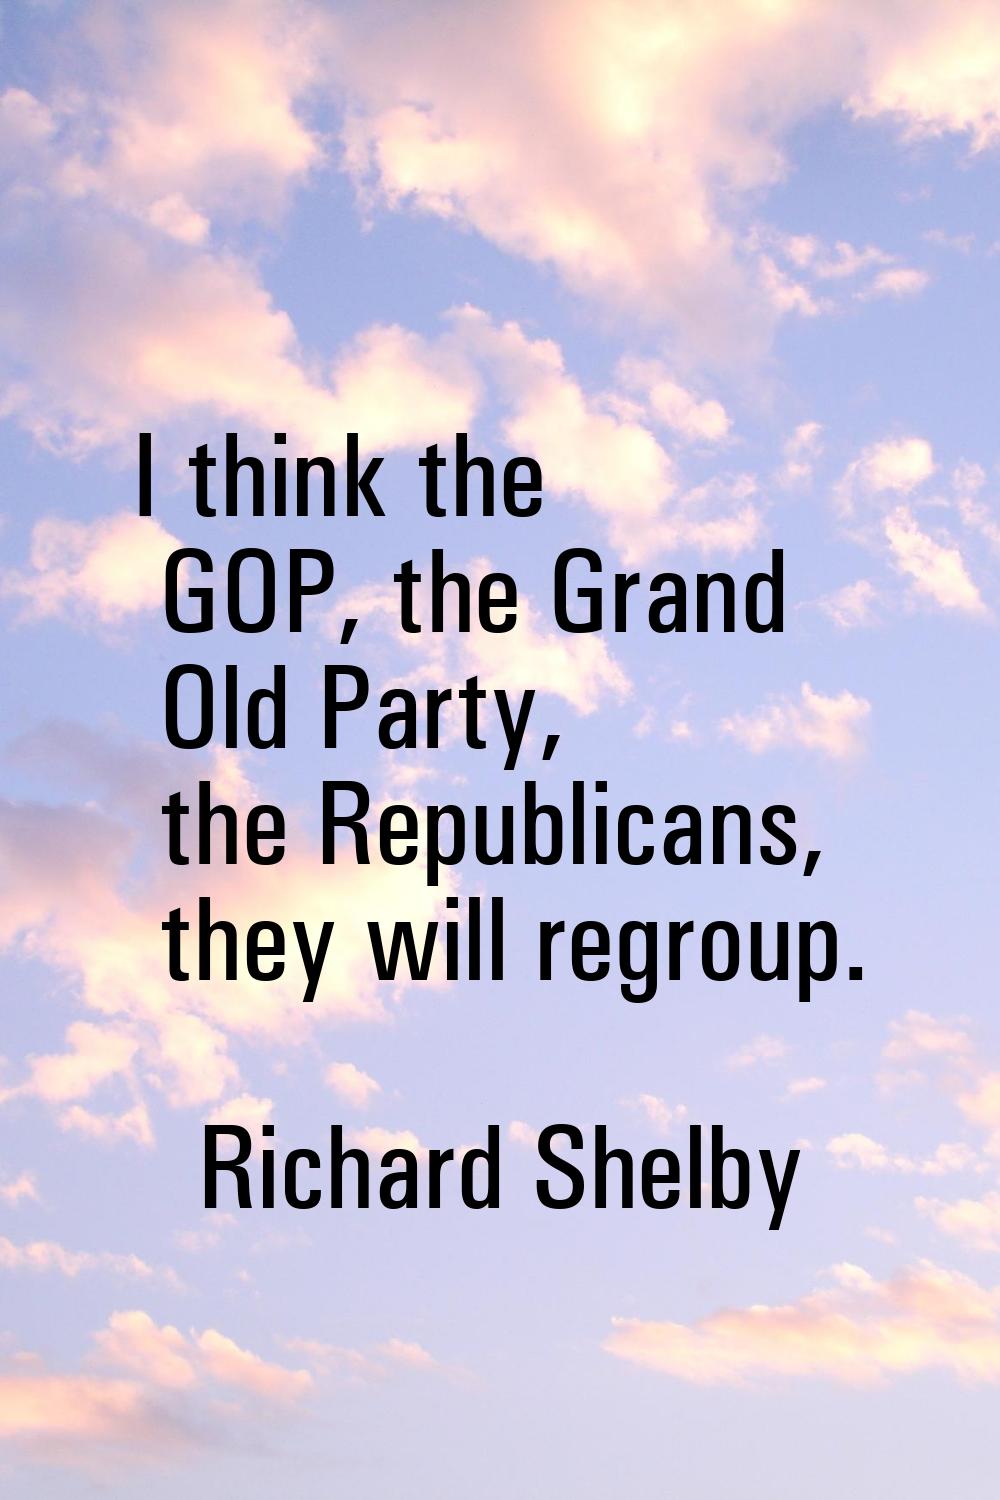 I think the GOP, the Grand Old Party, the Republicans, they will regroup.